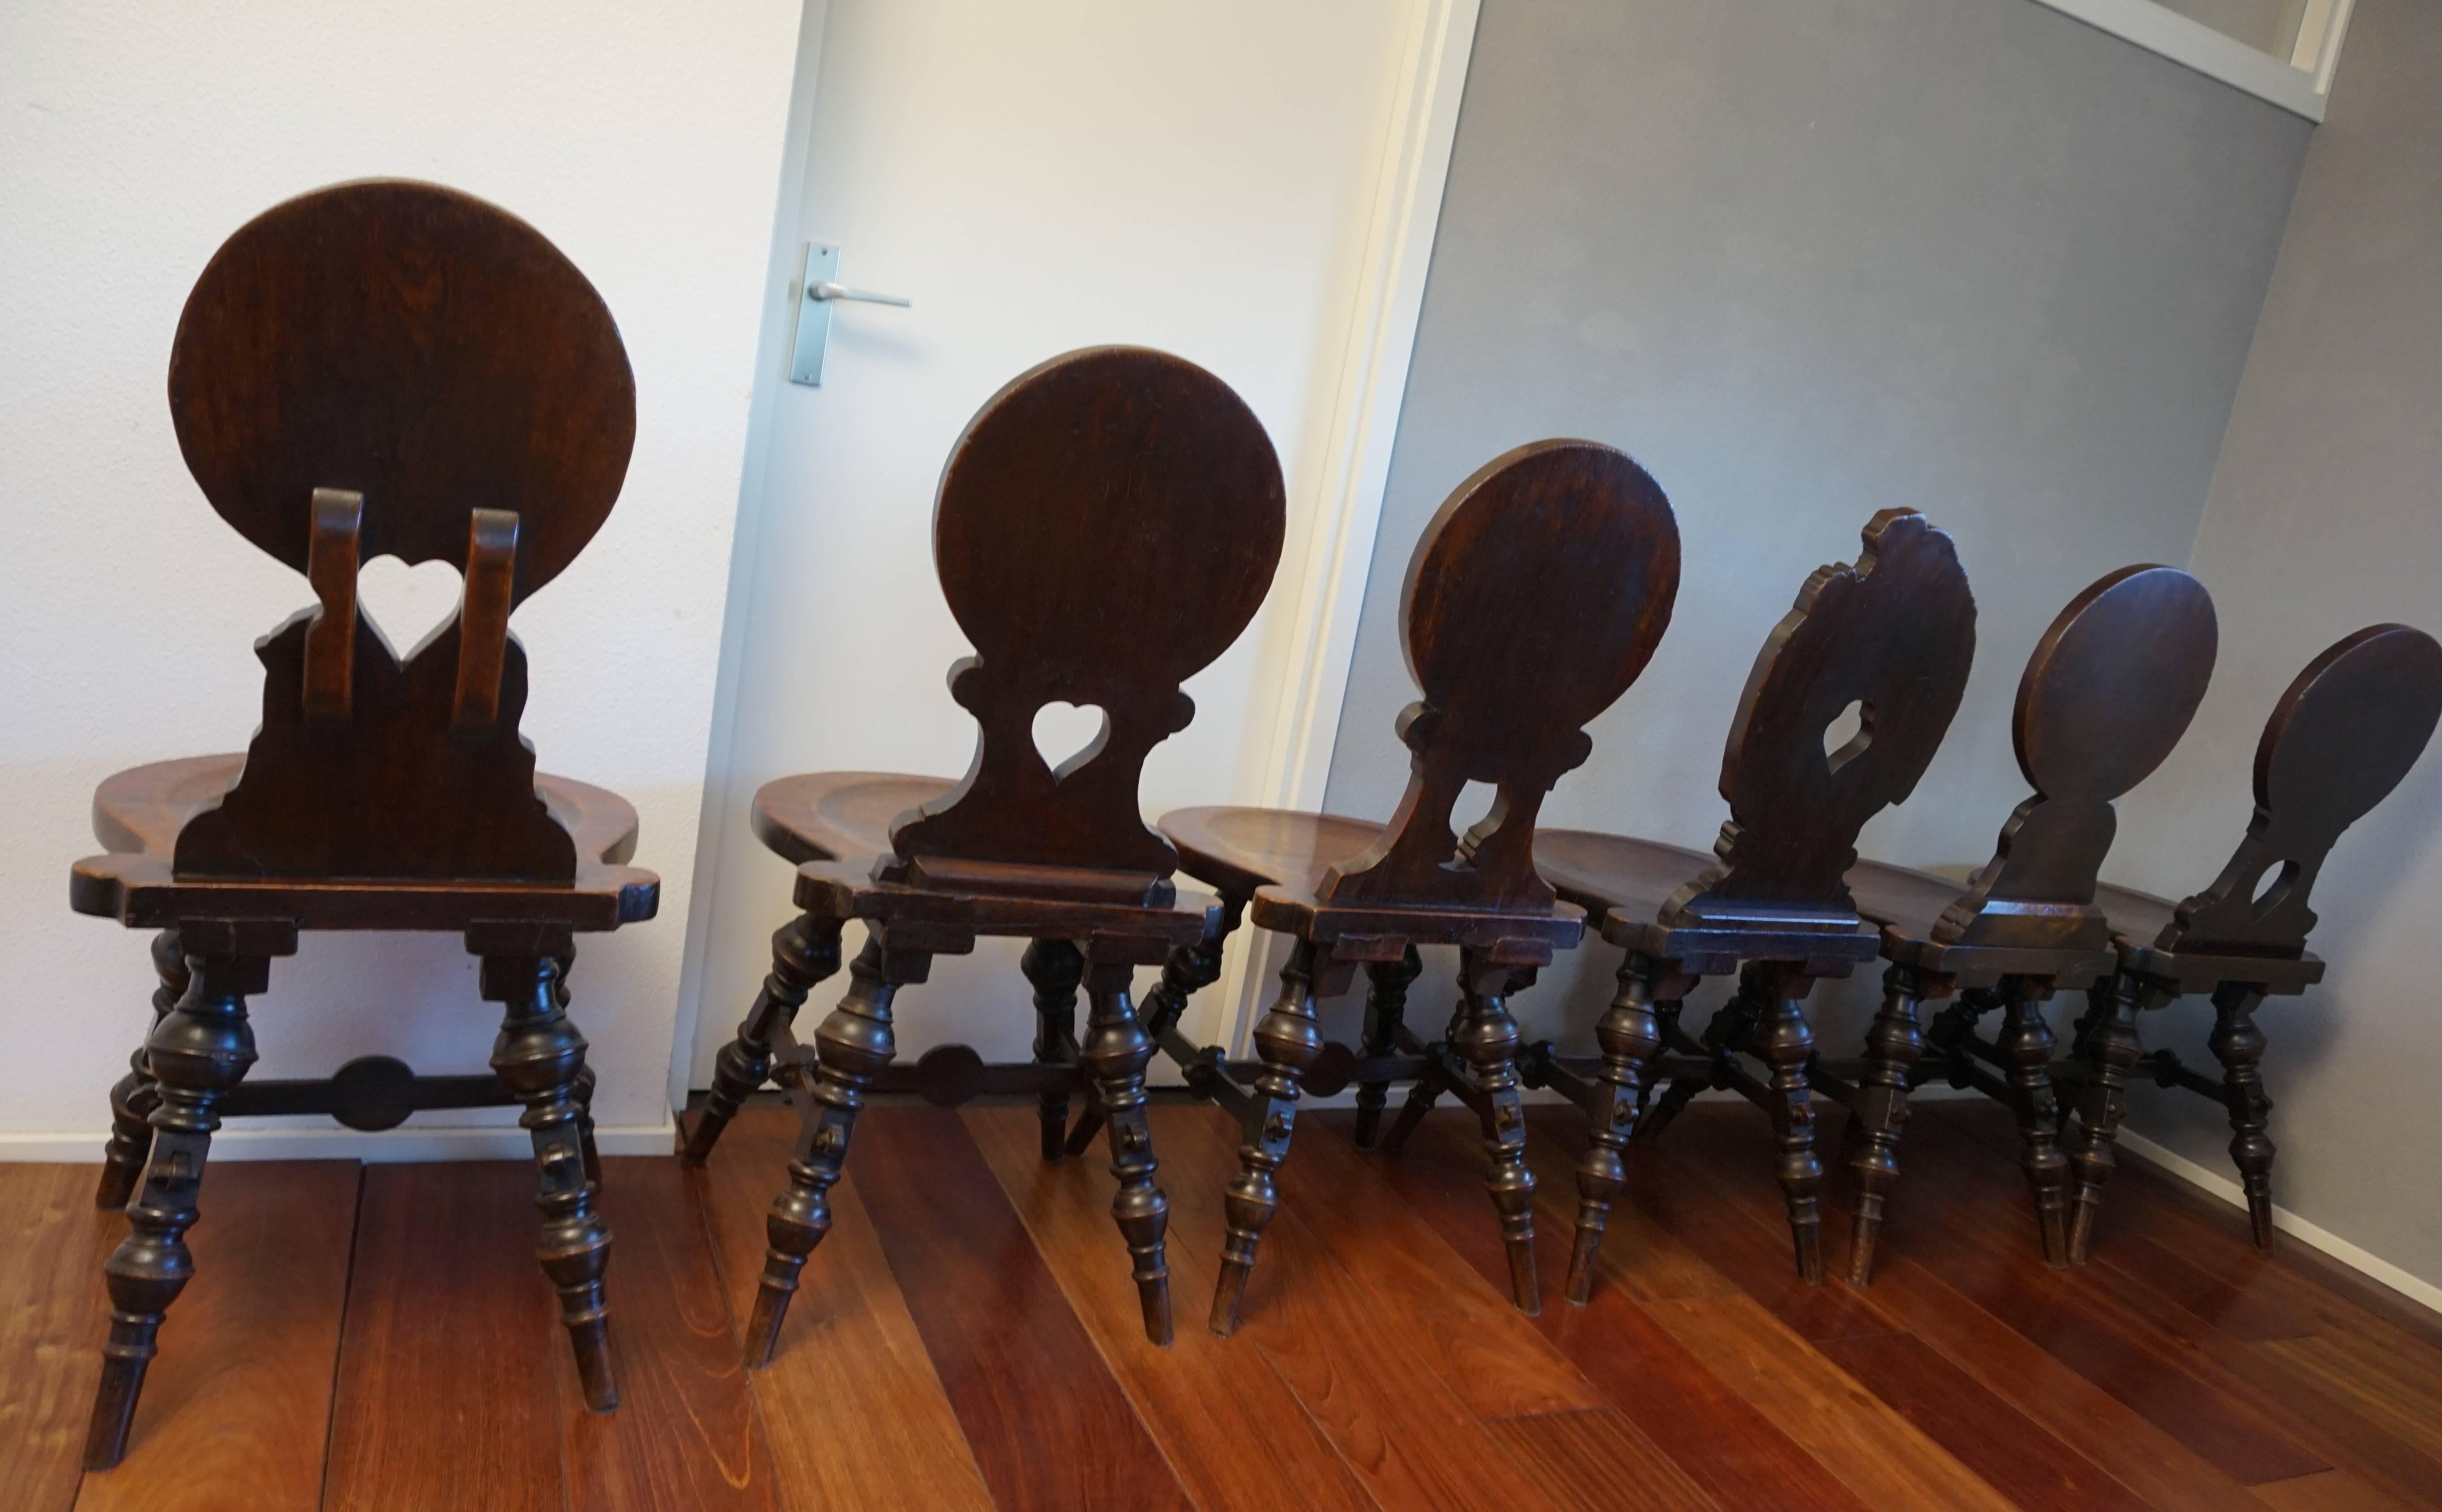 19th Century Six Antique & Hand-Carved German Tavern / Drinking Chairs with Aphorisms Sayings